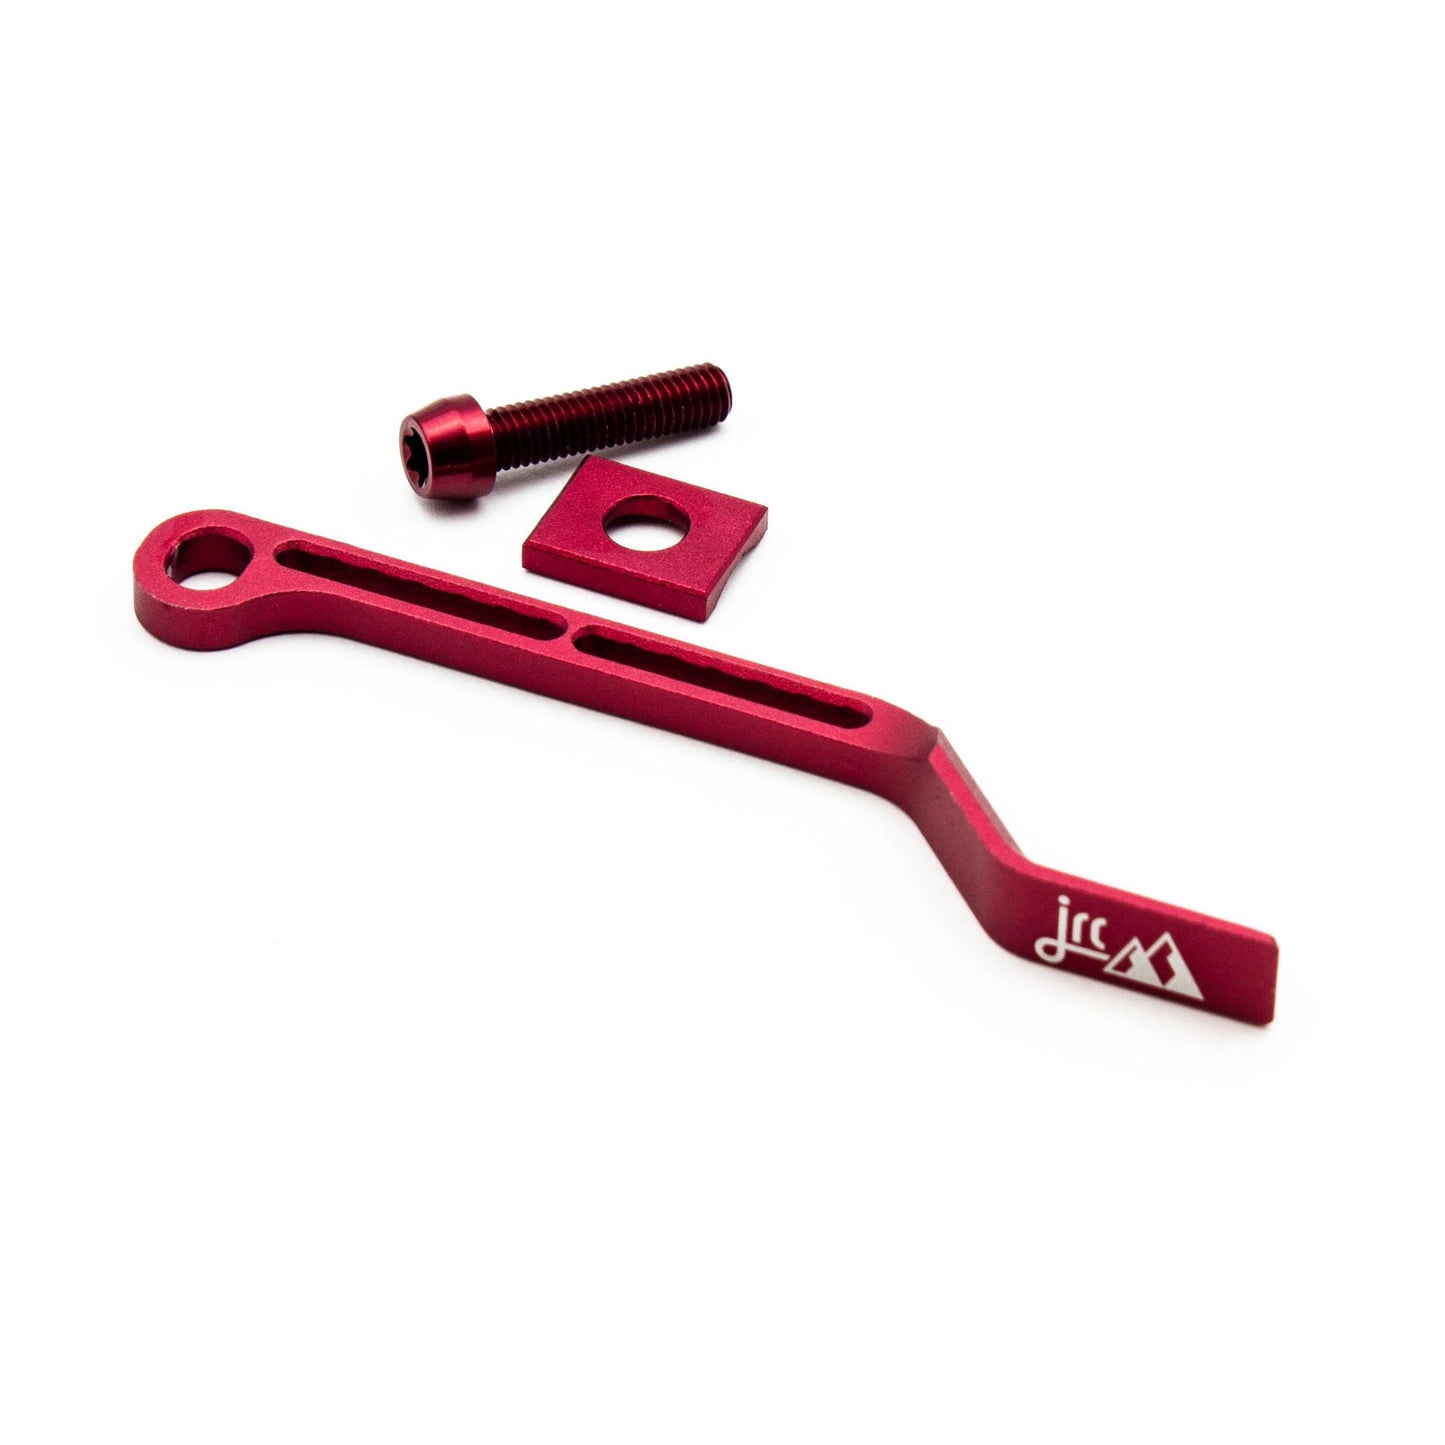 Red, lightweight aluminium bicycle chain catcher kit with alloy mounting bolts and braze-clamp spacer